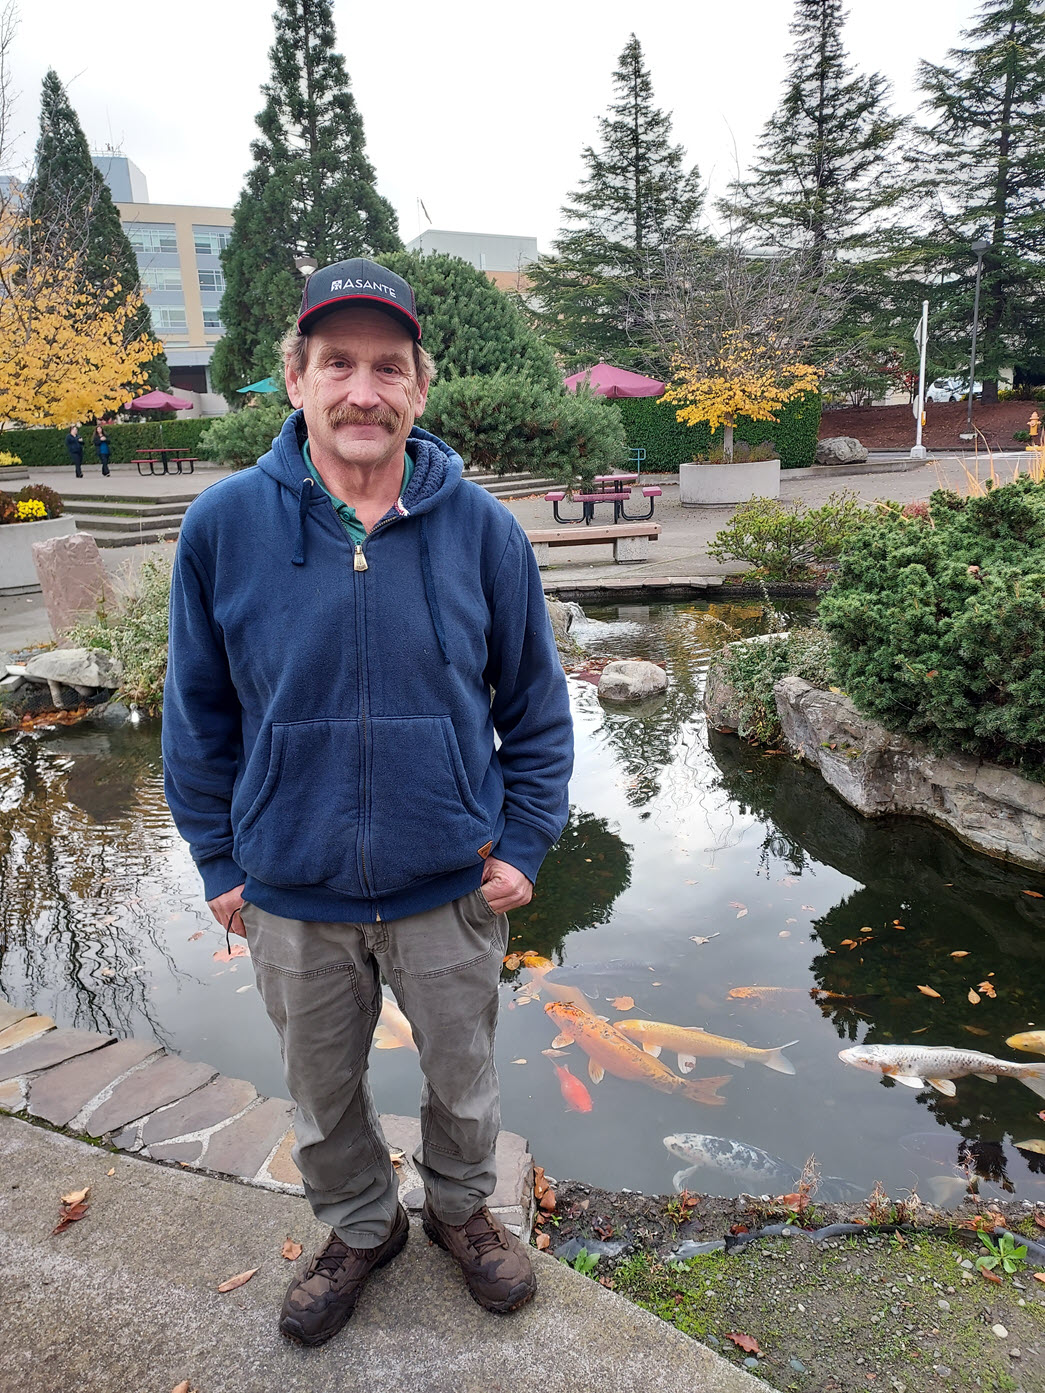 Mike McDonald standing in front of a koi pond with large fish visible in the water.